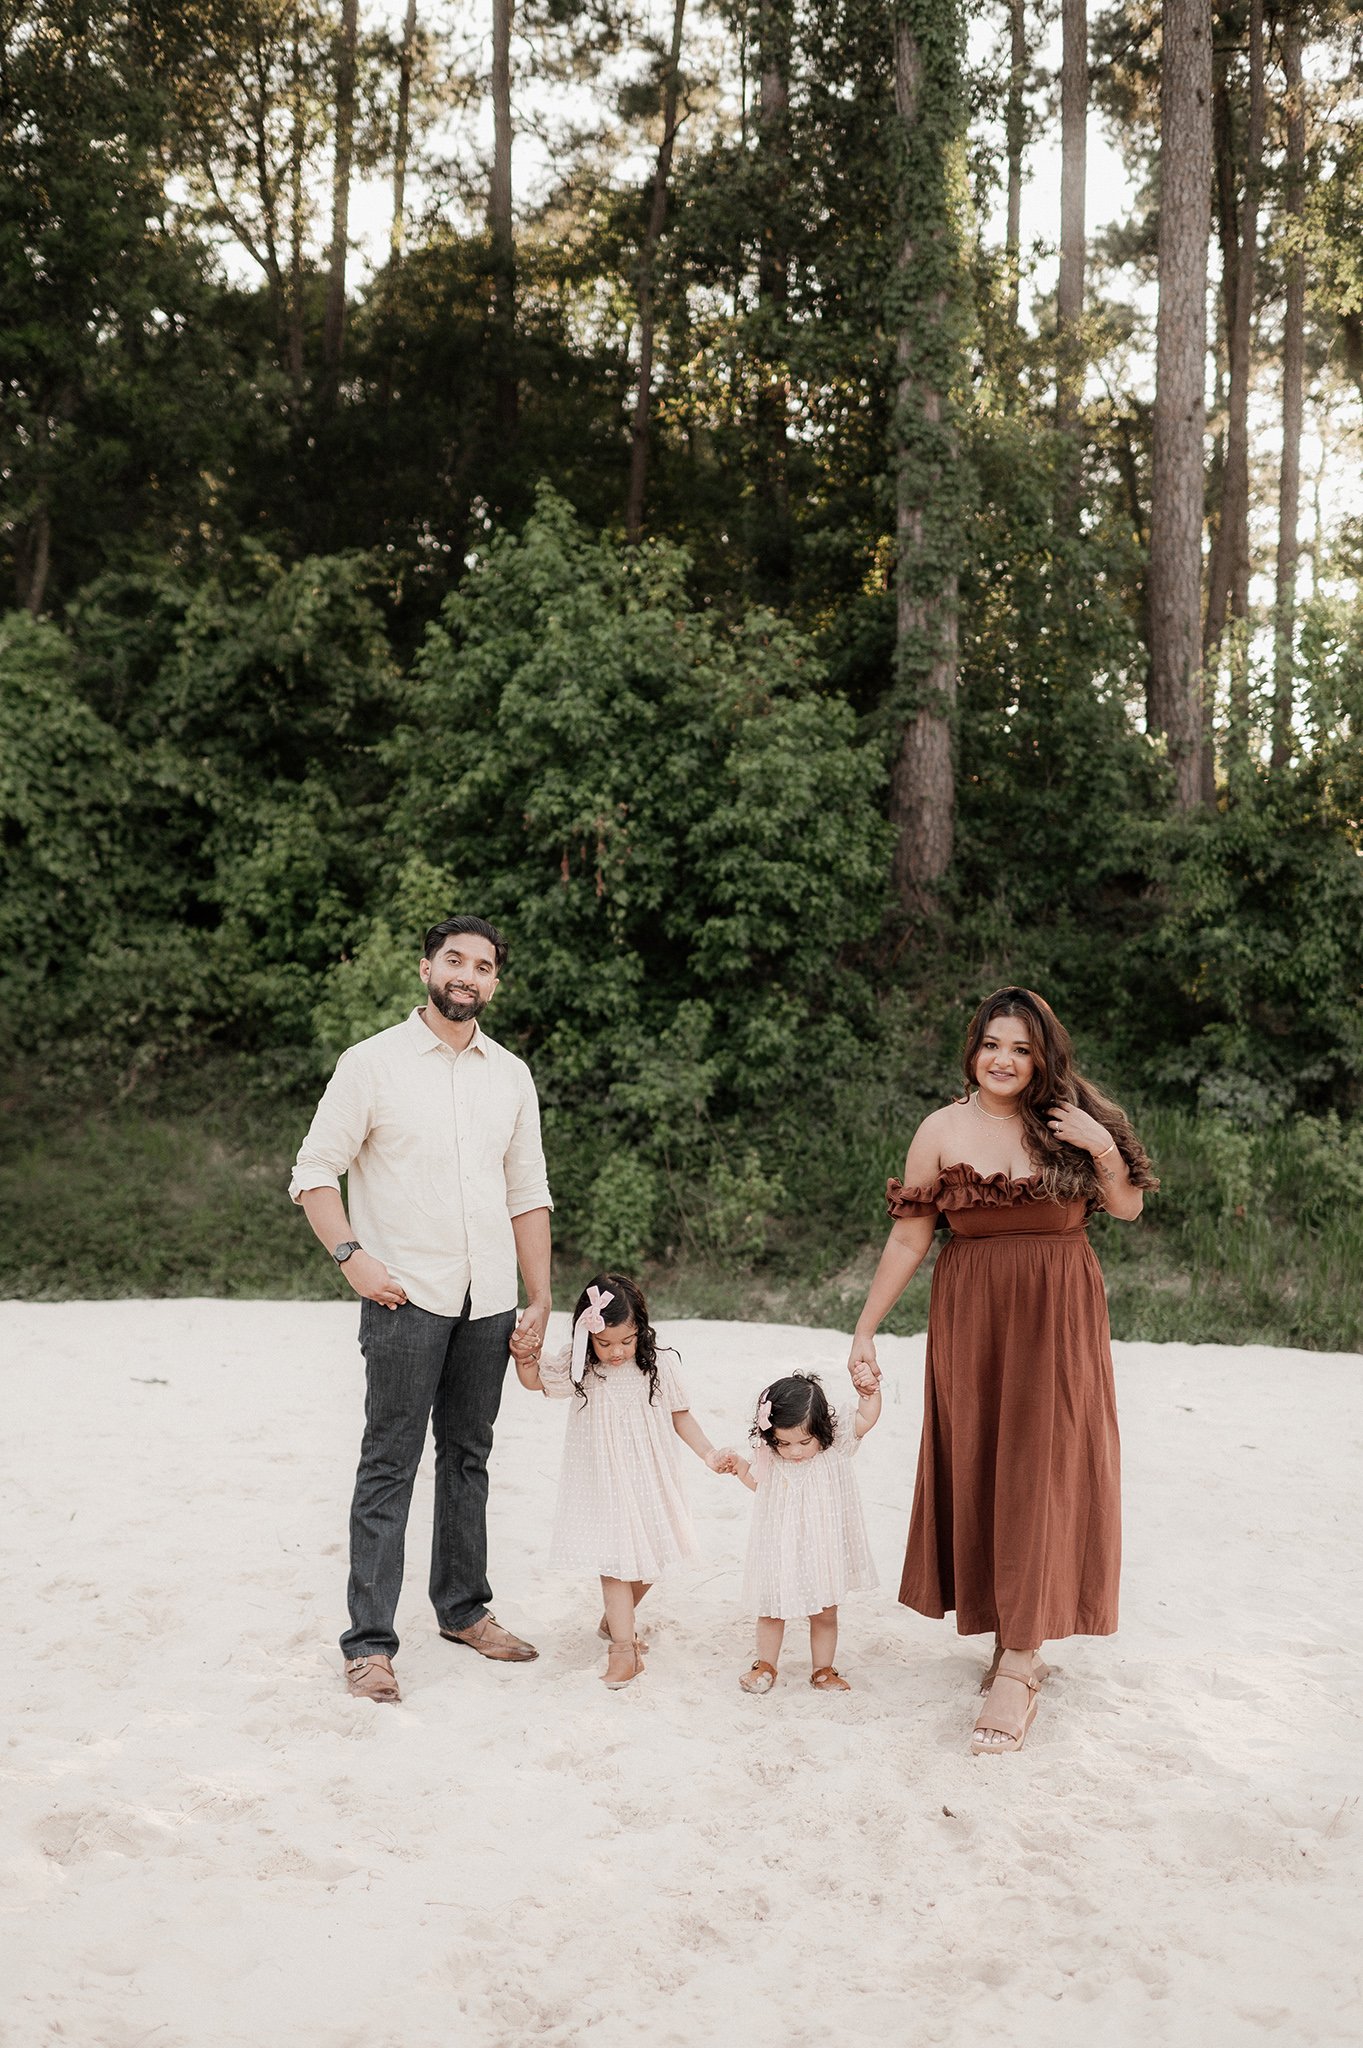 the woodlands family photographer _ conroe photographer _ houston family photographer _ ashley gillen photography _ texas family photographer _ conroe wedding photographer _ conroe texas _ cshi39.jpg